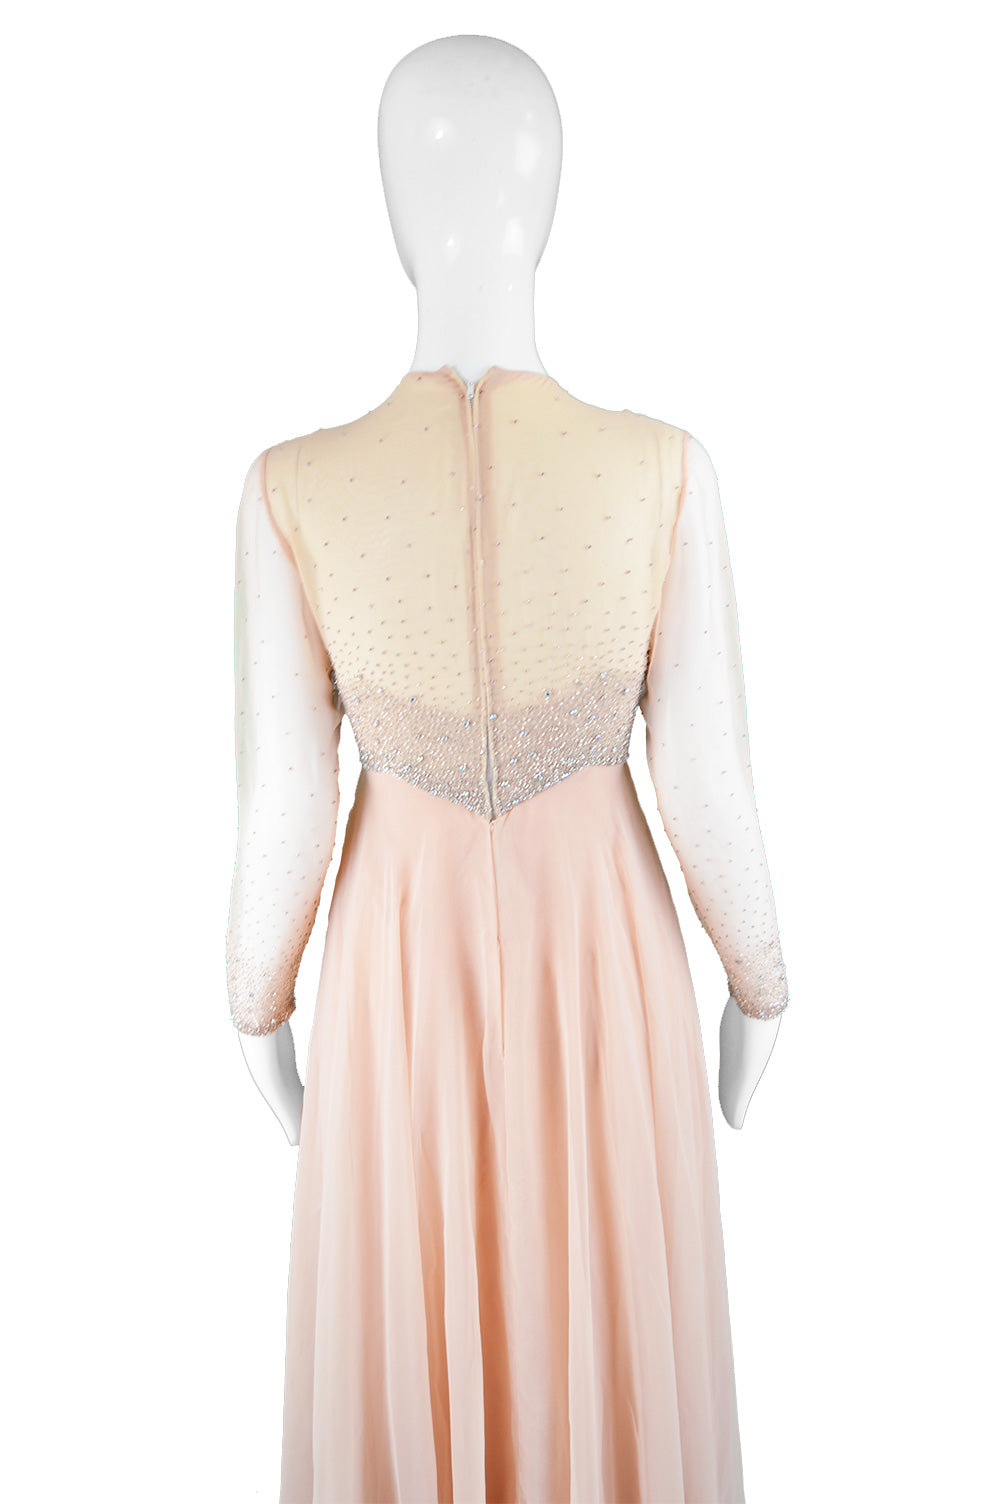 Peach Vintage Chiffon Beaded Evening Gown, 1960s